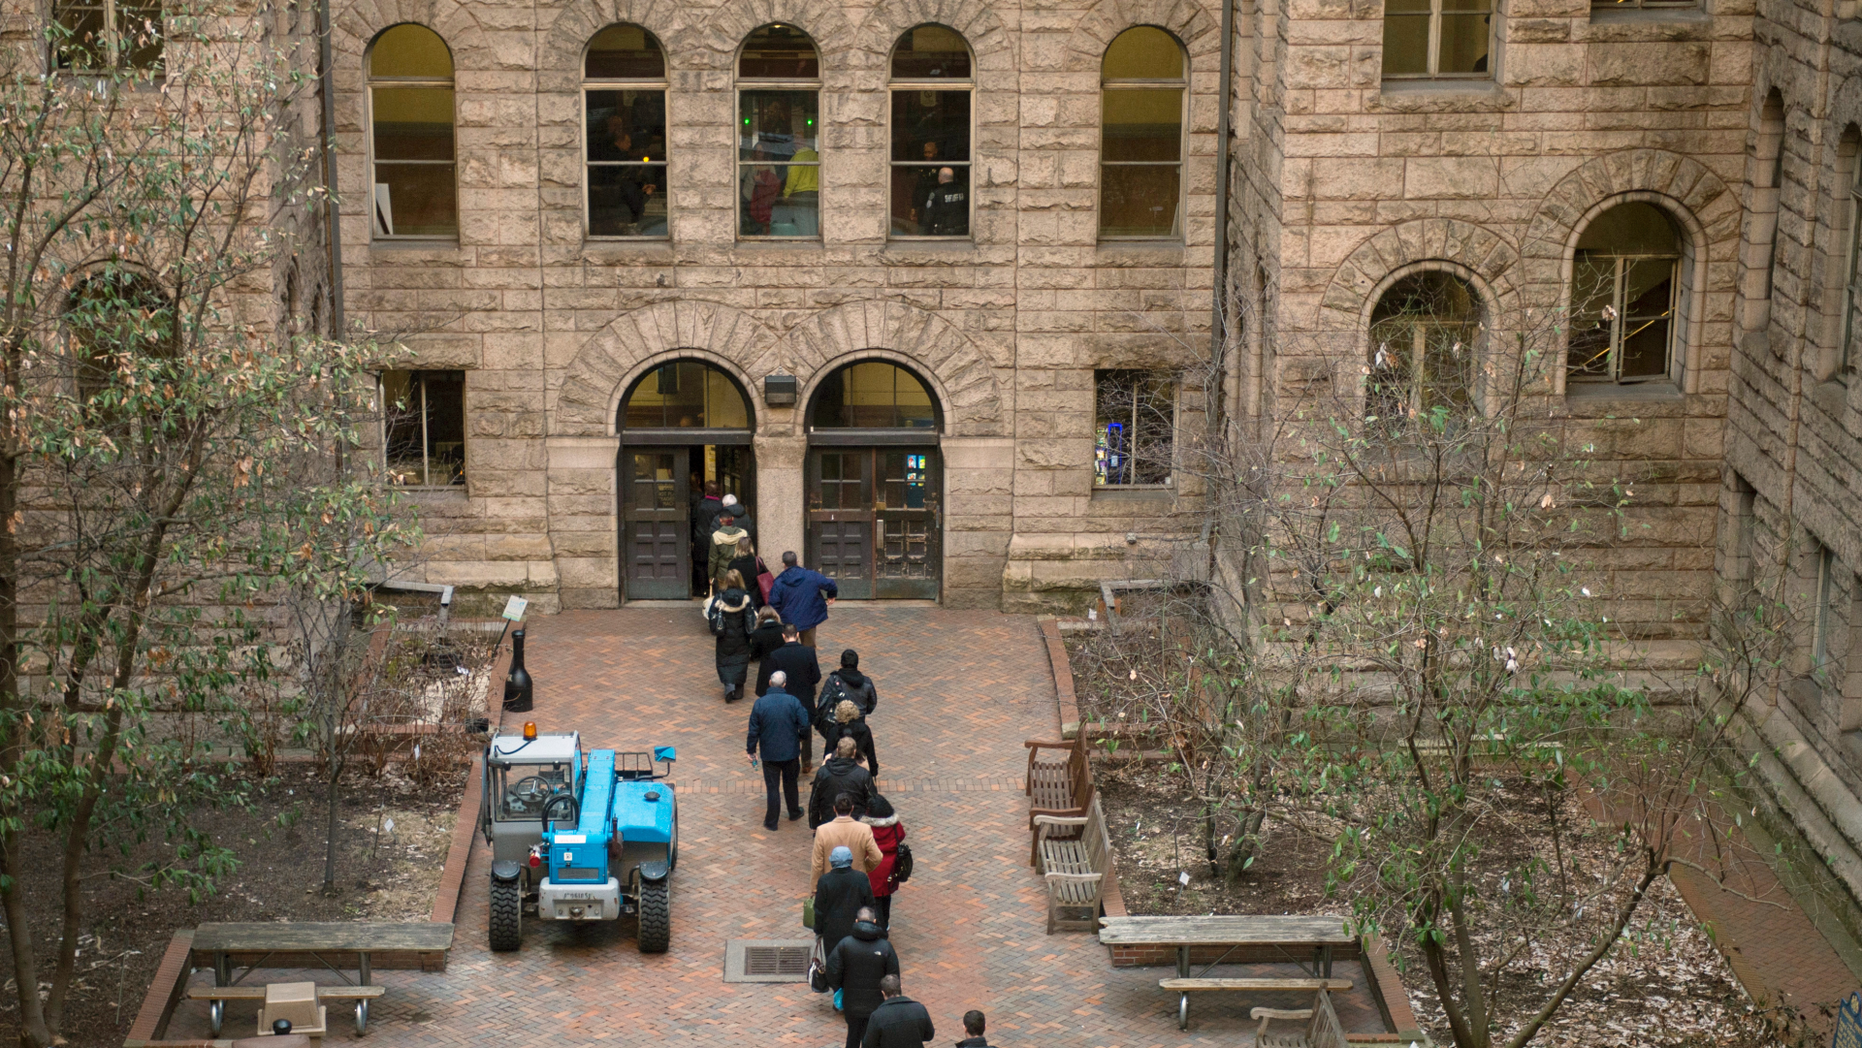 People arrive at the Allegheny County Courthouse before the start of the second day of the trial for homicide of former East Pittsburgh police officer, Michael Rosfeld, on Wednesday, March 20, 2019 in Pittsburgh. Rosfeld, 30, faces a charge of criminal homicide for the death in June 2018 of Antwon Rose II, a 17-year-old unarmed high school student. (Nate Smallwood / Pittsburgh Tribune-Review via AP, Pool)